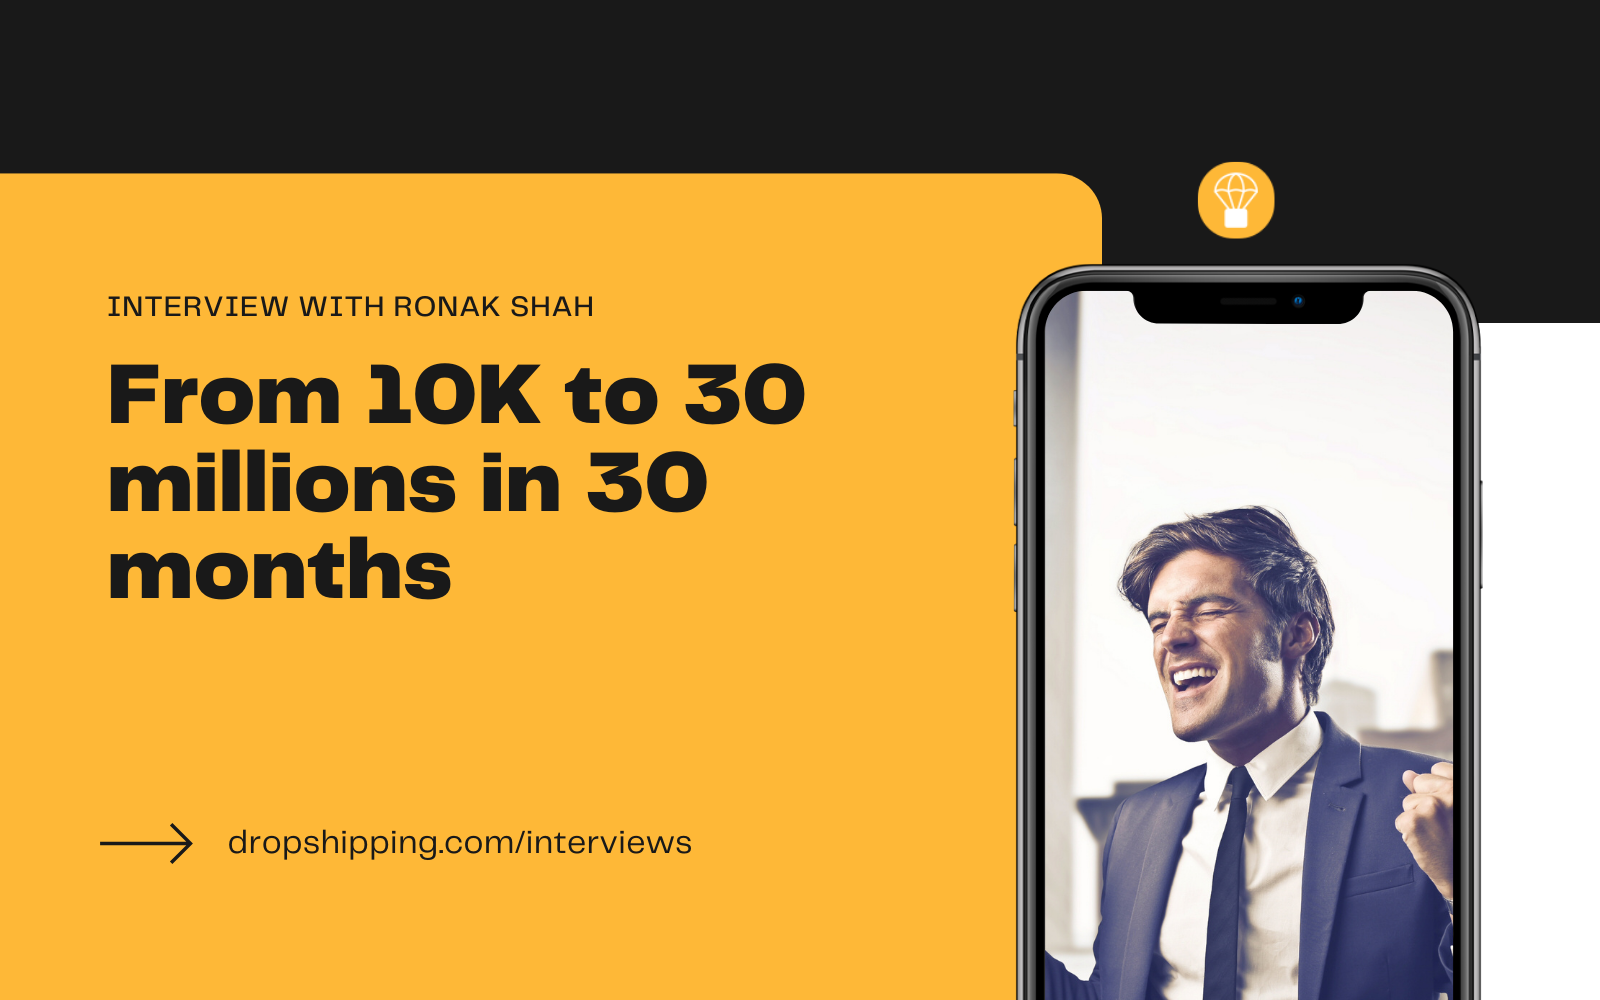 Interview: "From 10K to 30 millions in 30 months"